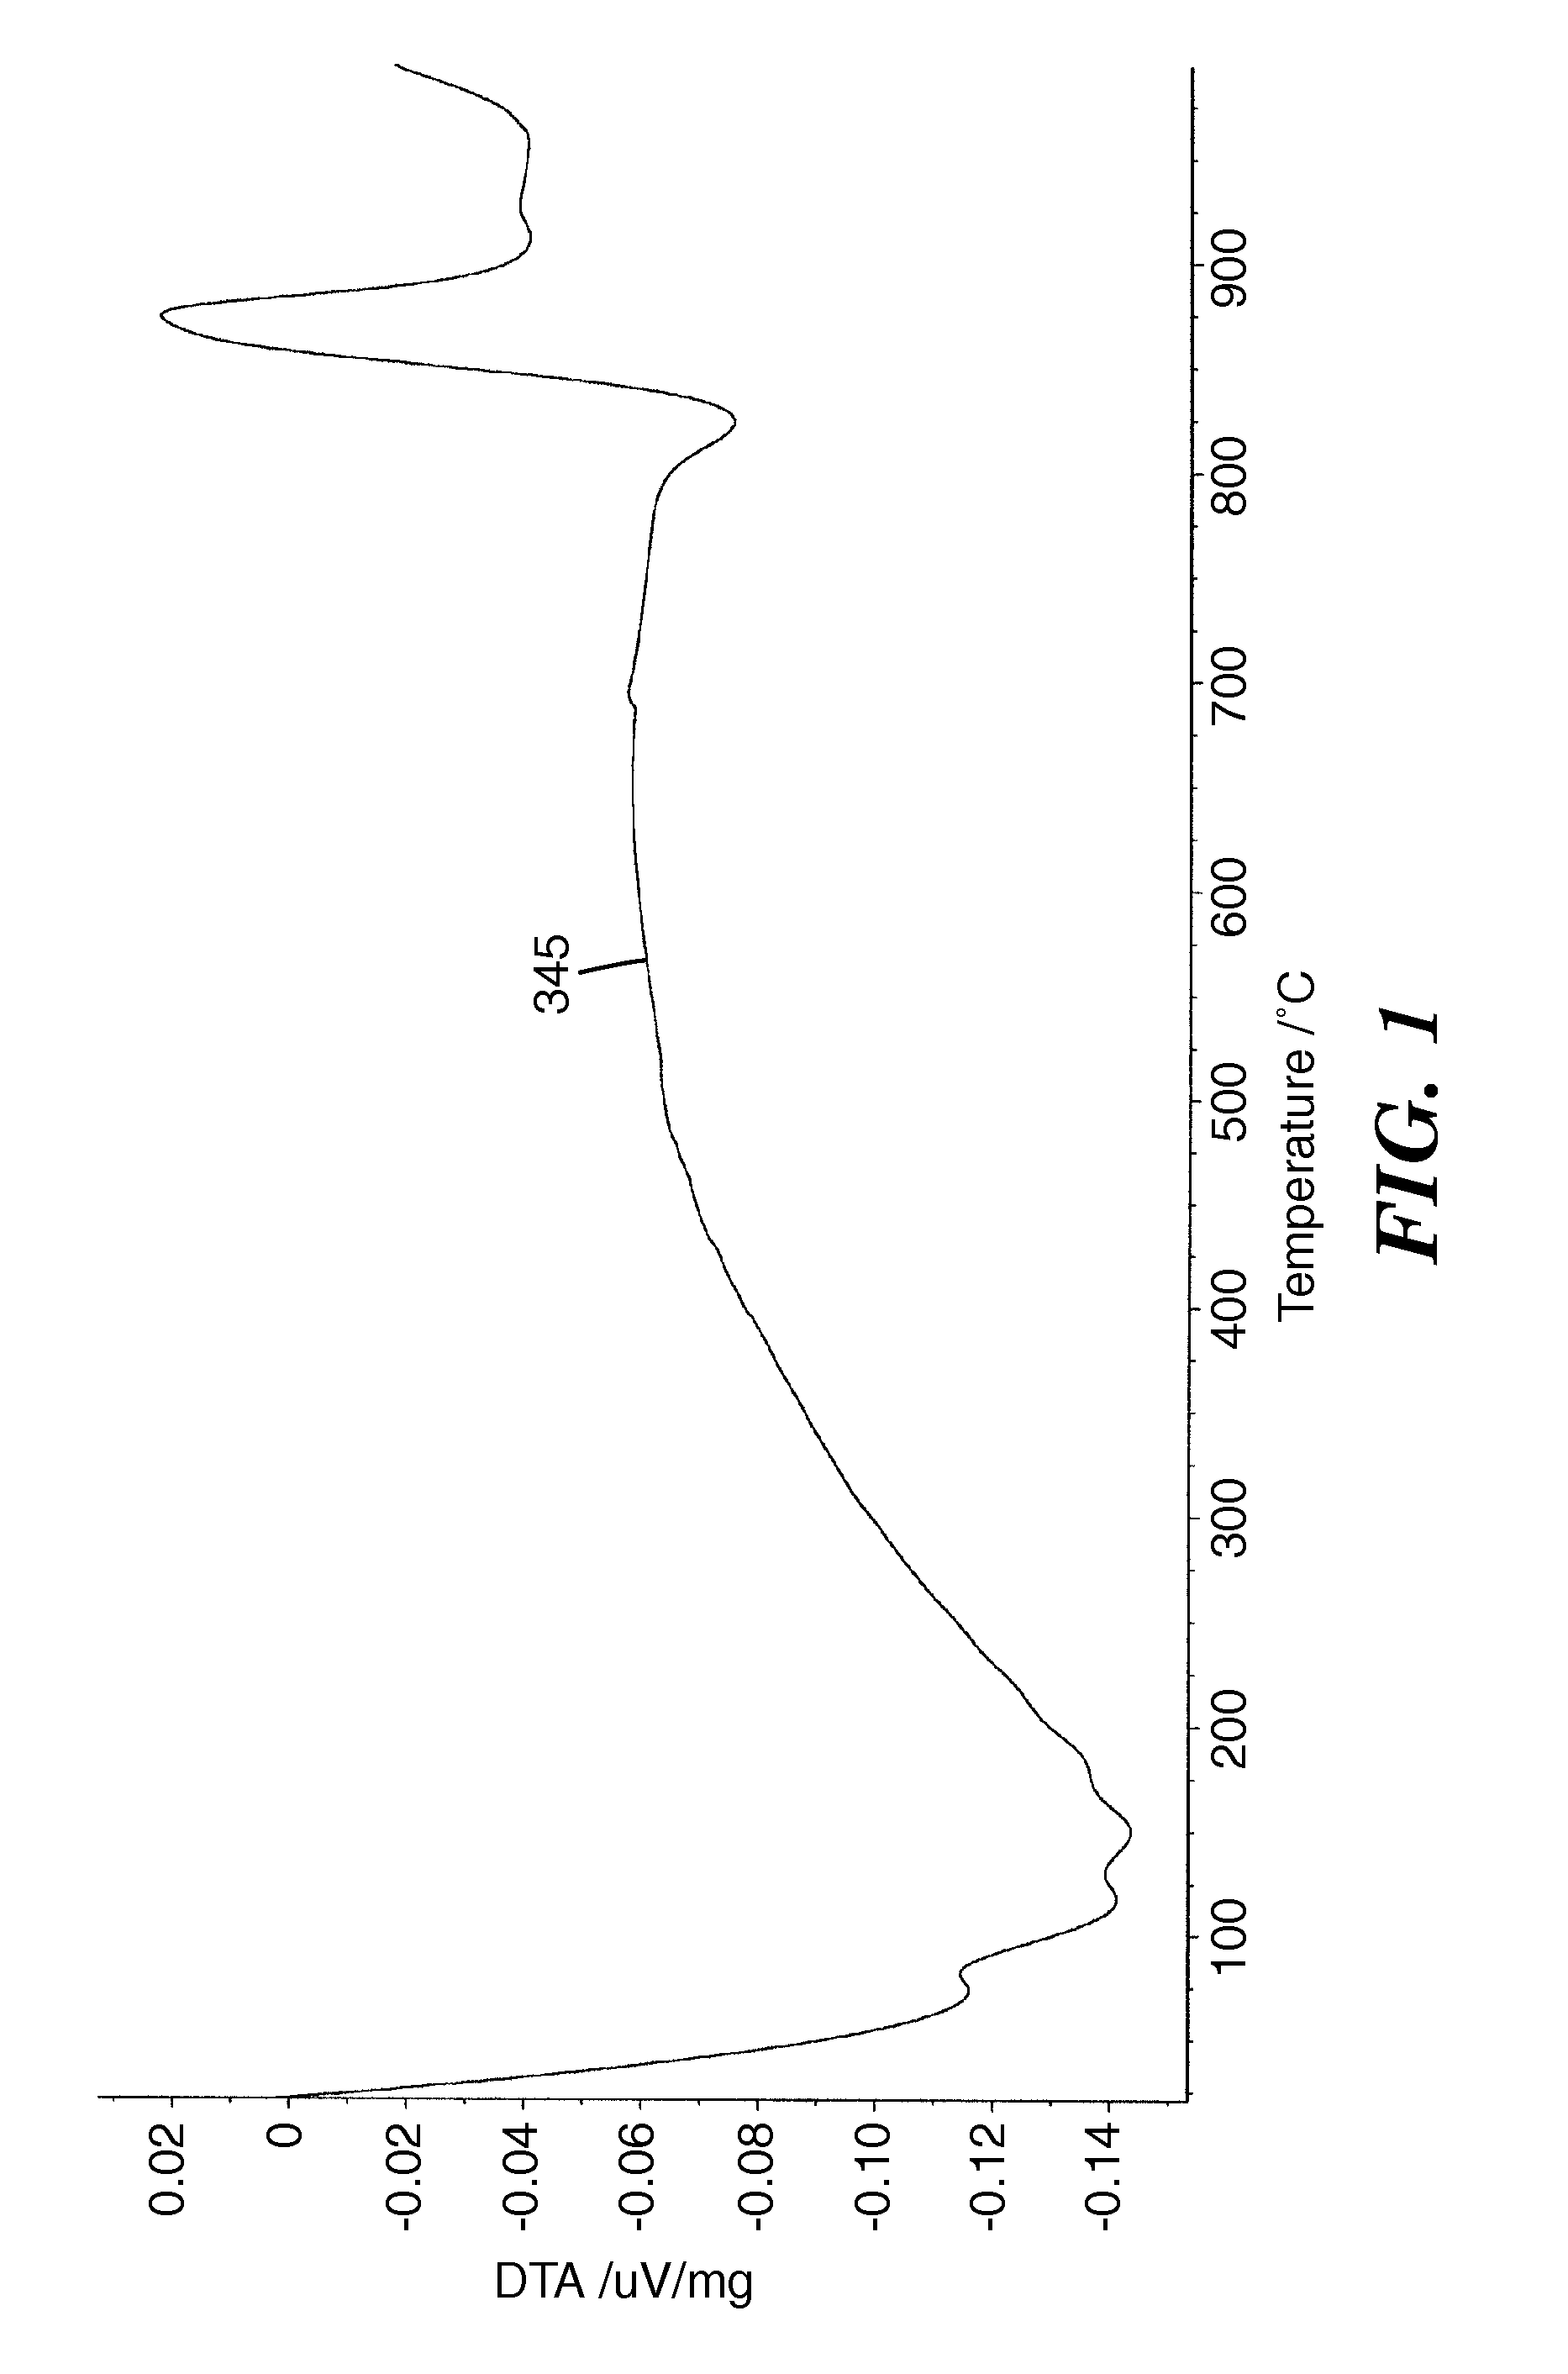 Metal oxide ceramic and method of making articles therewith